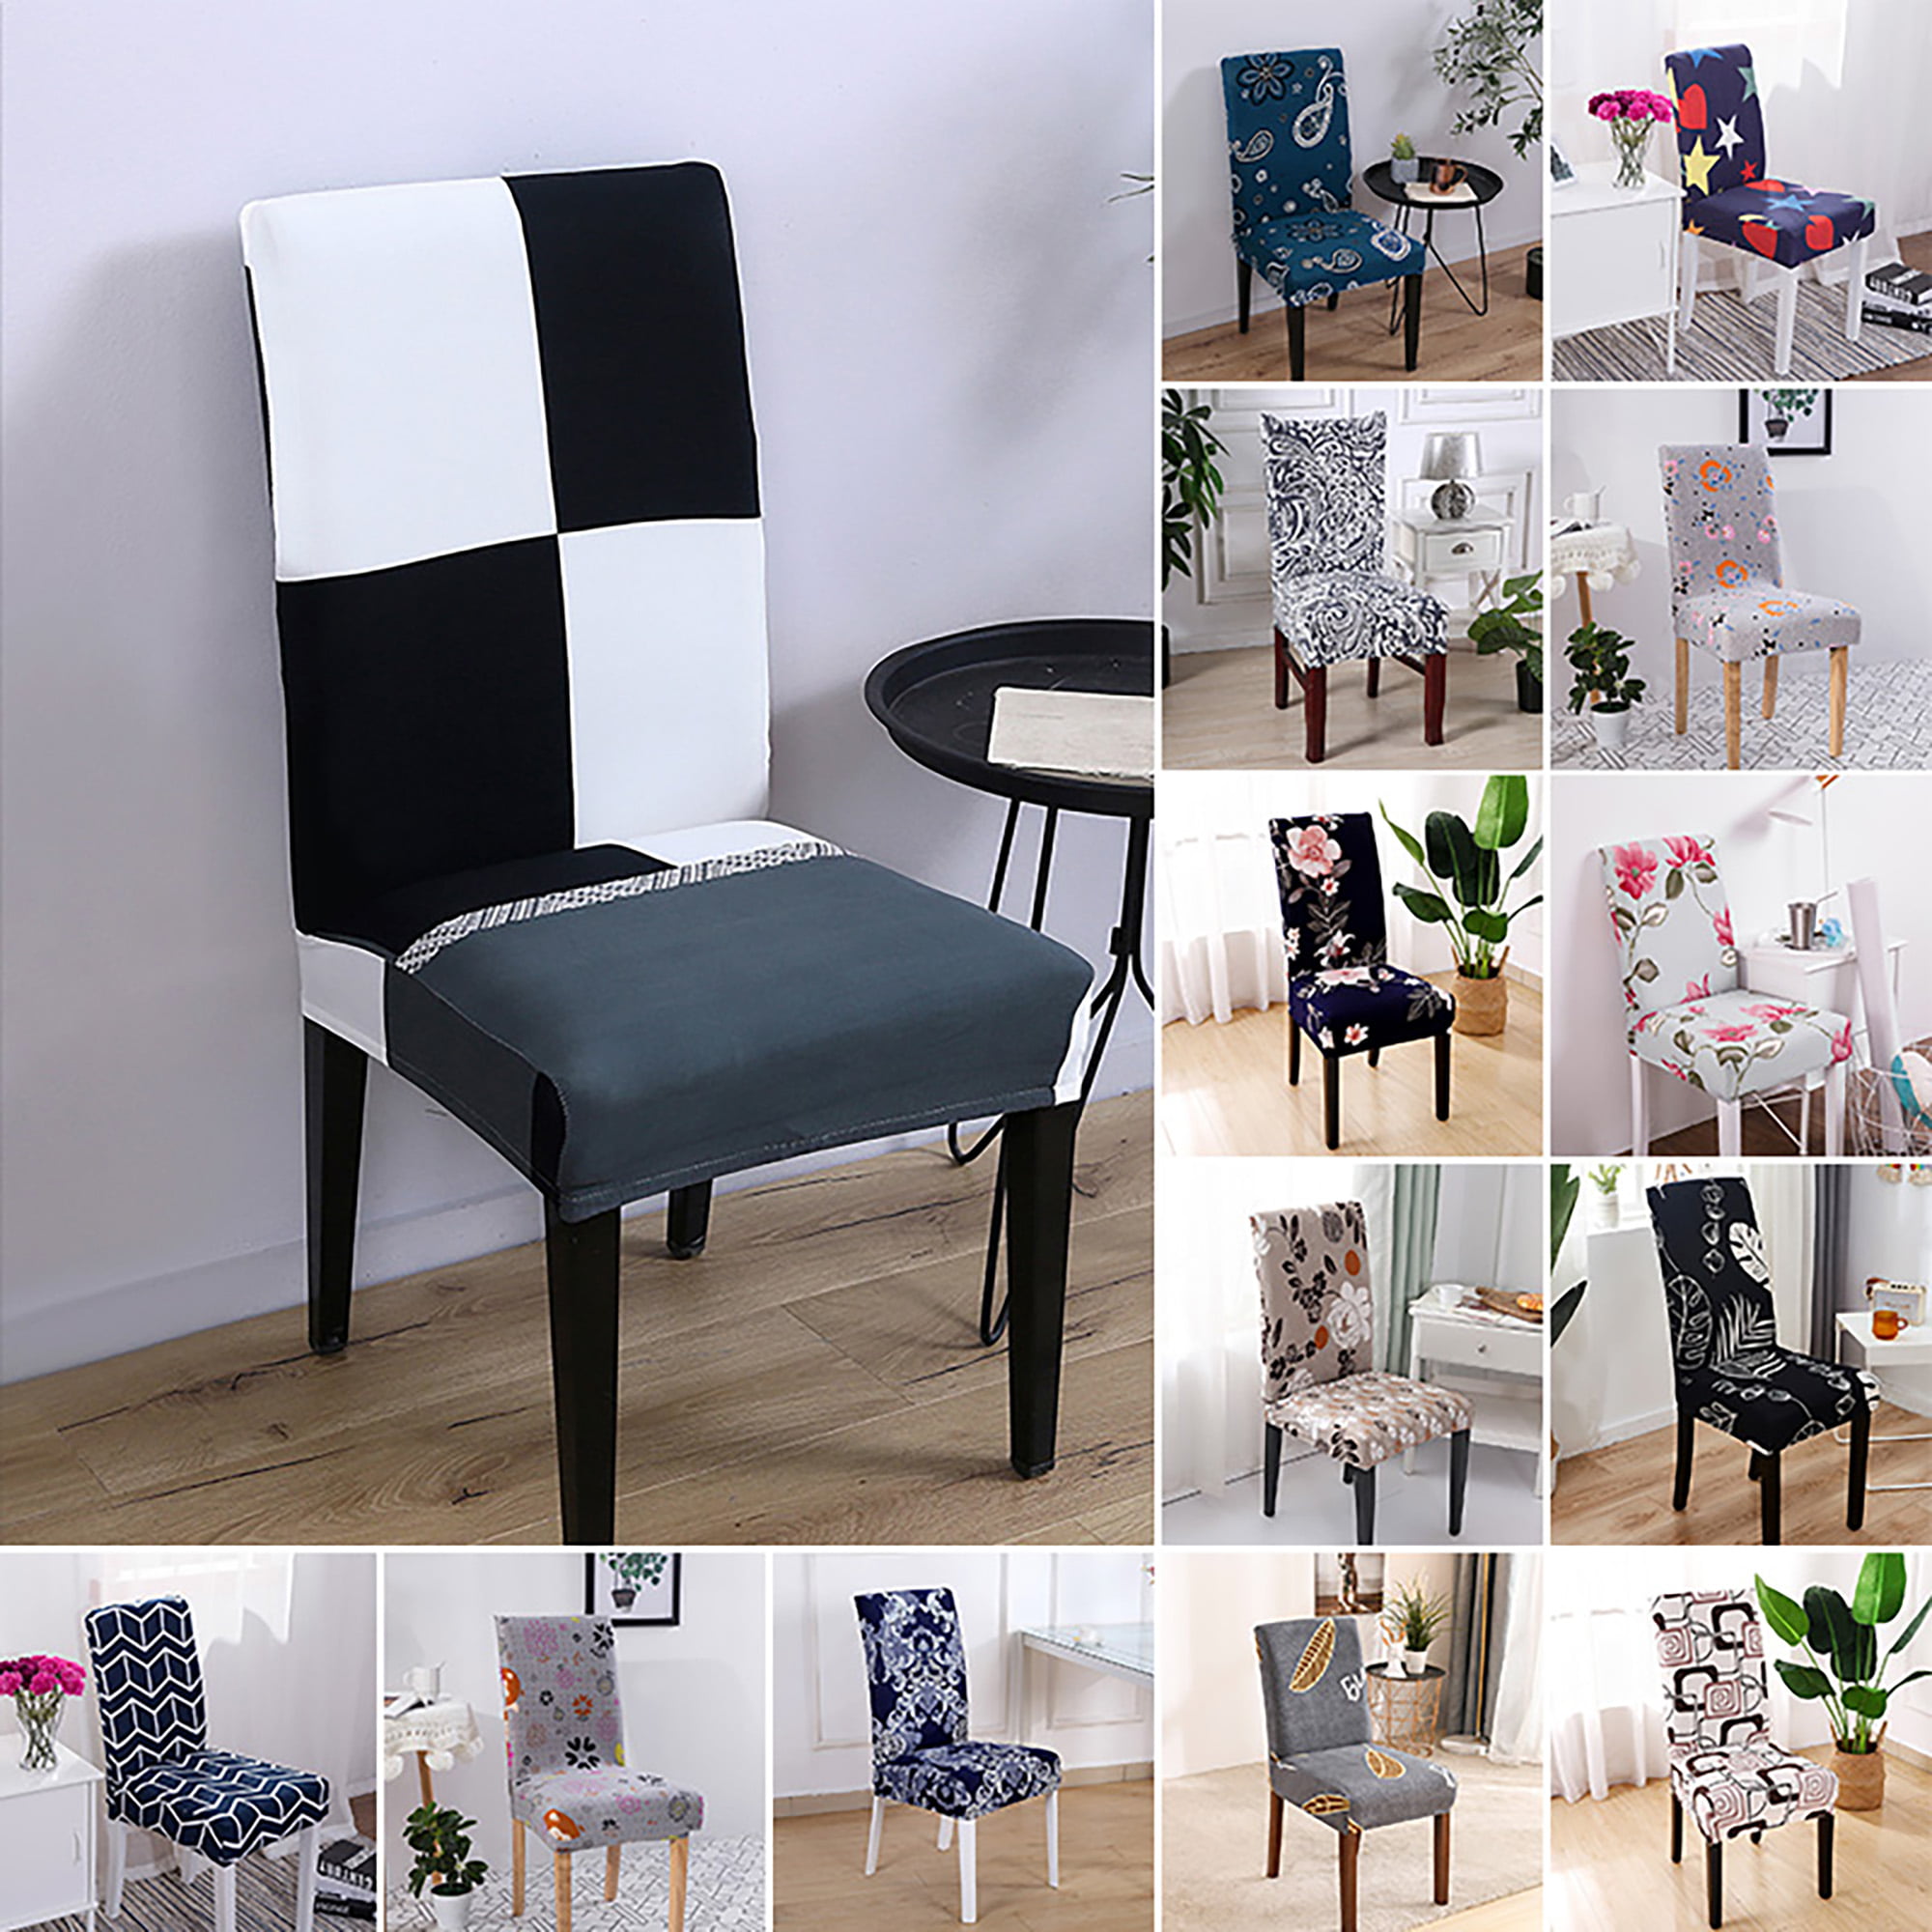 Details about   Removable Stretch Chair Covers Slipcovers Dining Room Seat Cover Decor Home 